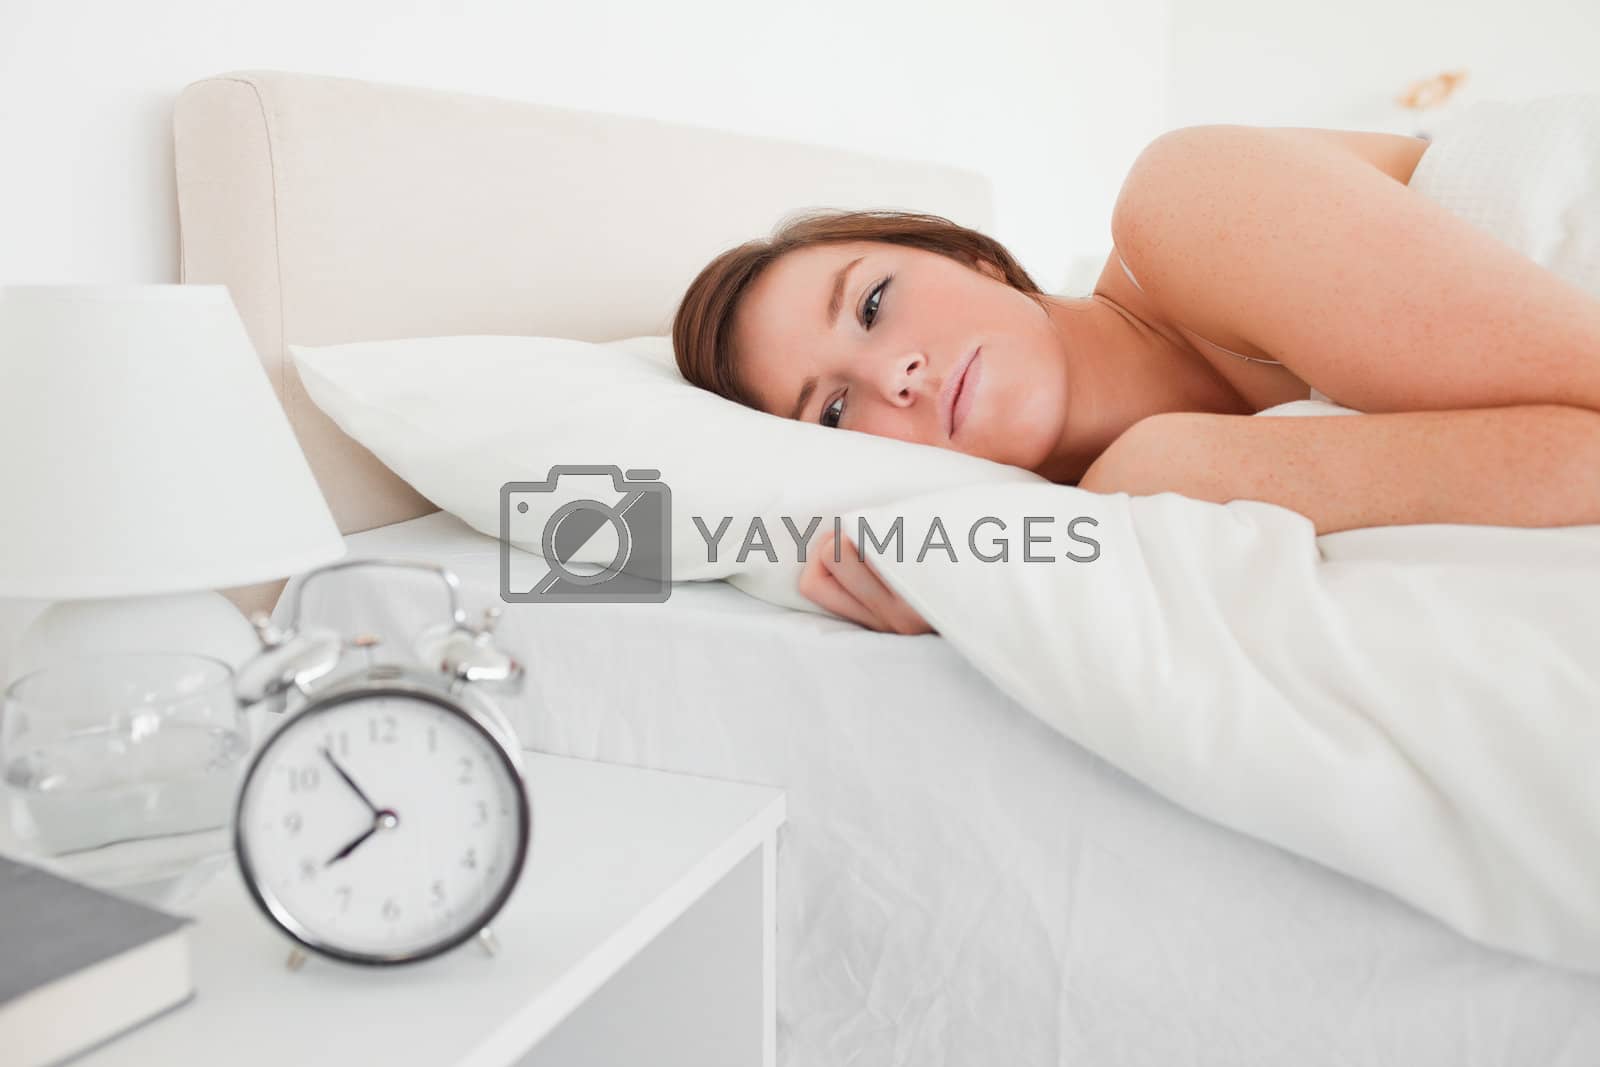 Royalty free image of Beautiful brunette woman awaking with a clock while lying by Wavebreakmedia